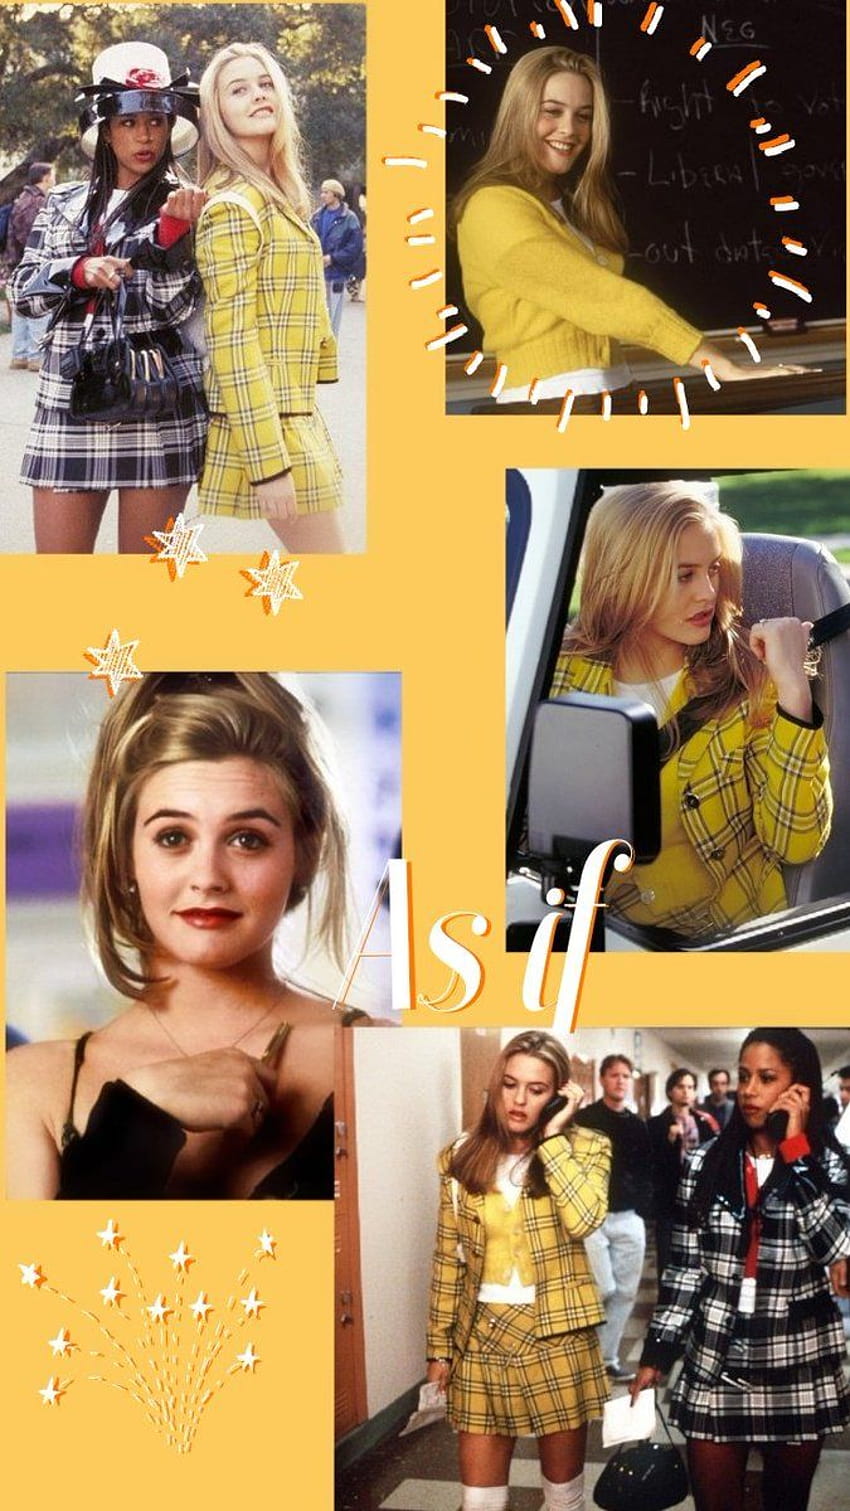 Clueless posted by Christopher Anderson, clueless aesthetic HD phone wallpaper